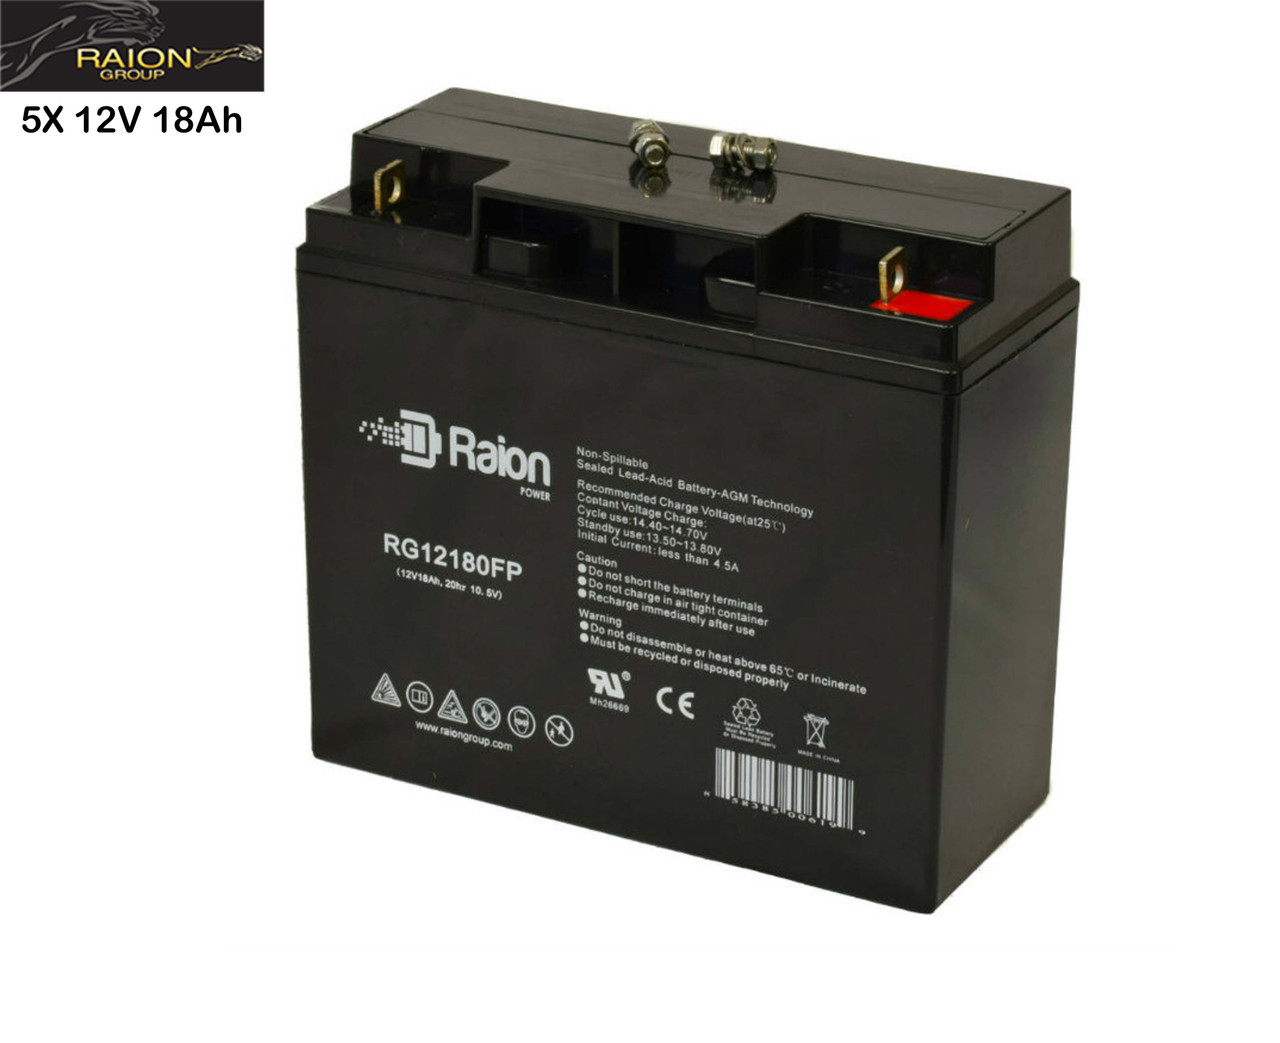 Raion Power Replacement 12V 18Ah Battery for Daymak Odyssey - 5 Pack